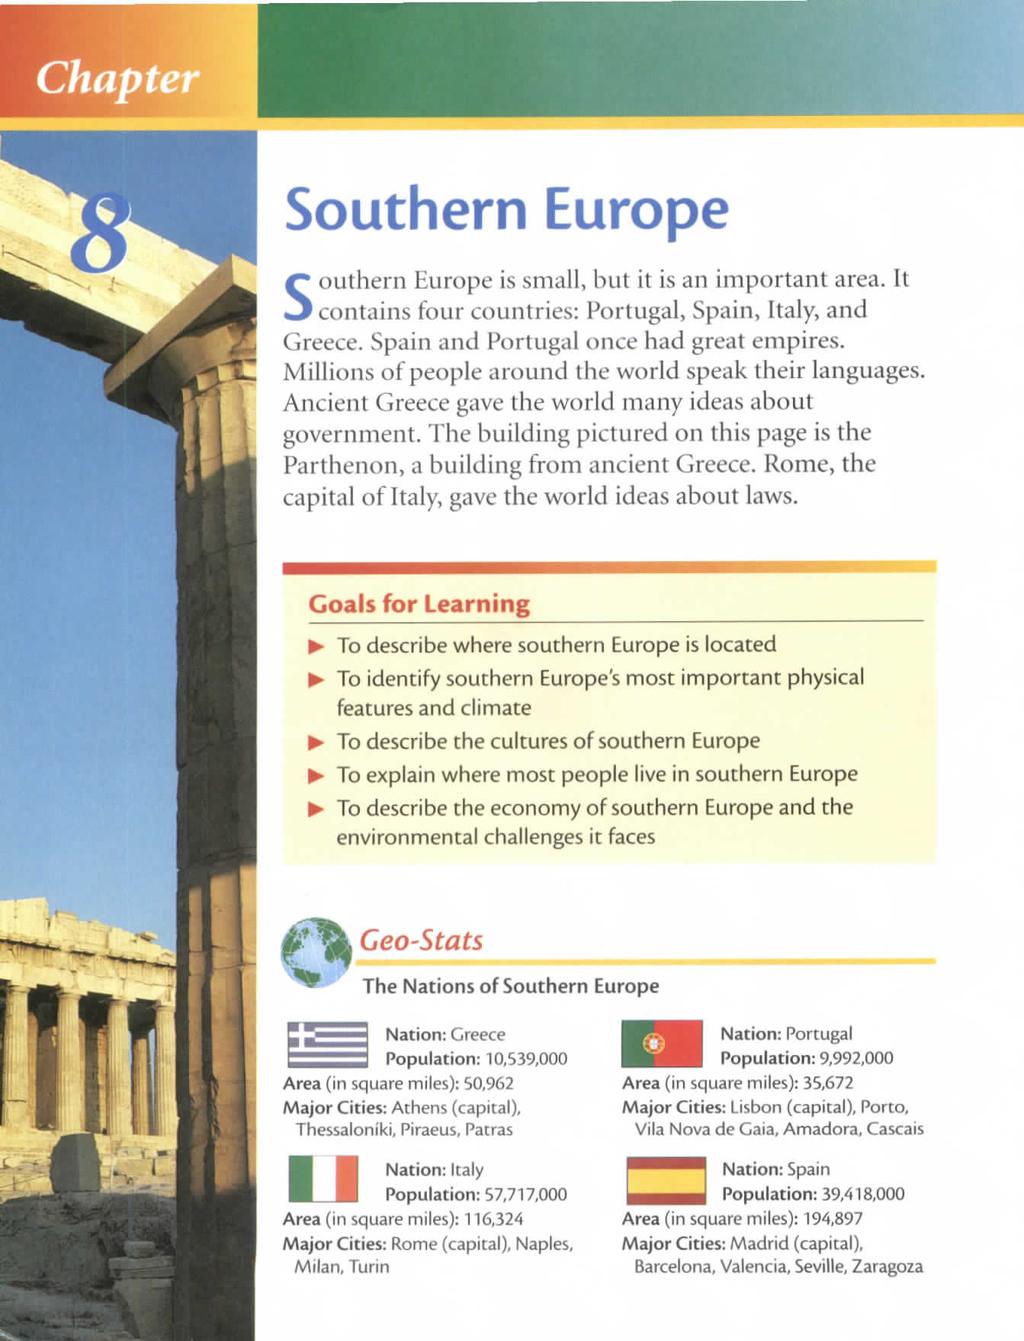 Southern Europe Southern Europe is small, but it is an important area. It contains four countries: Portugal, Spain, Italy, and Greece. Spain and Portugal once had great empires.